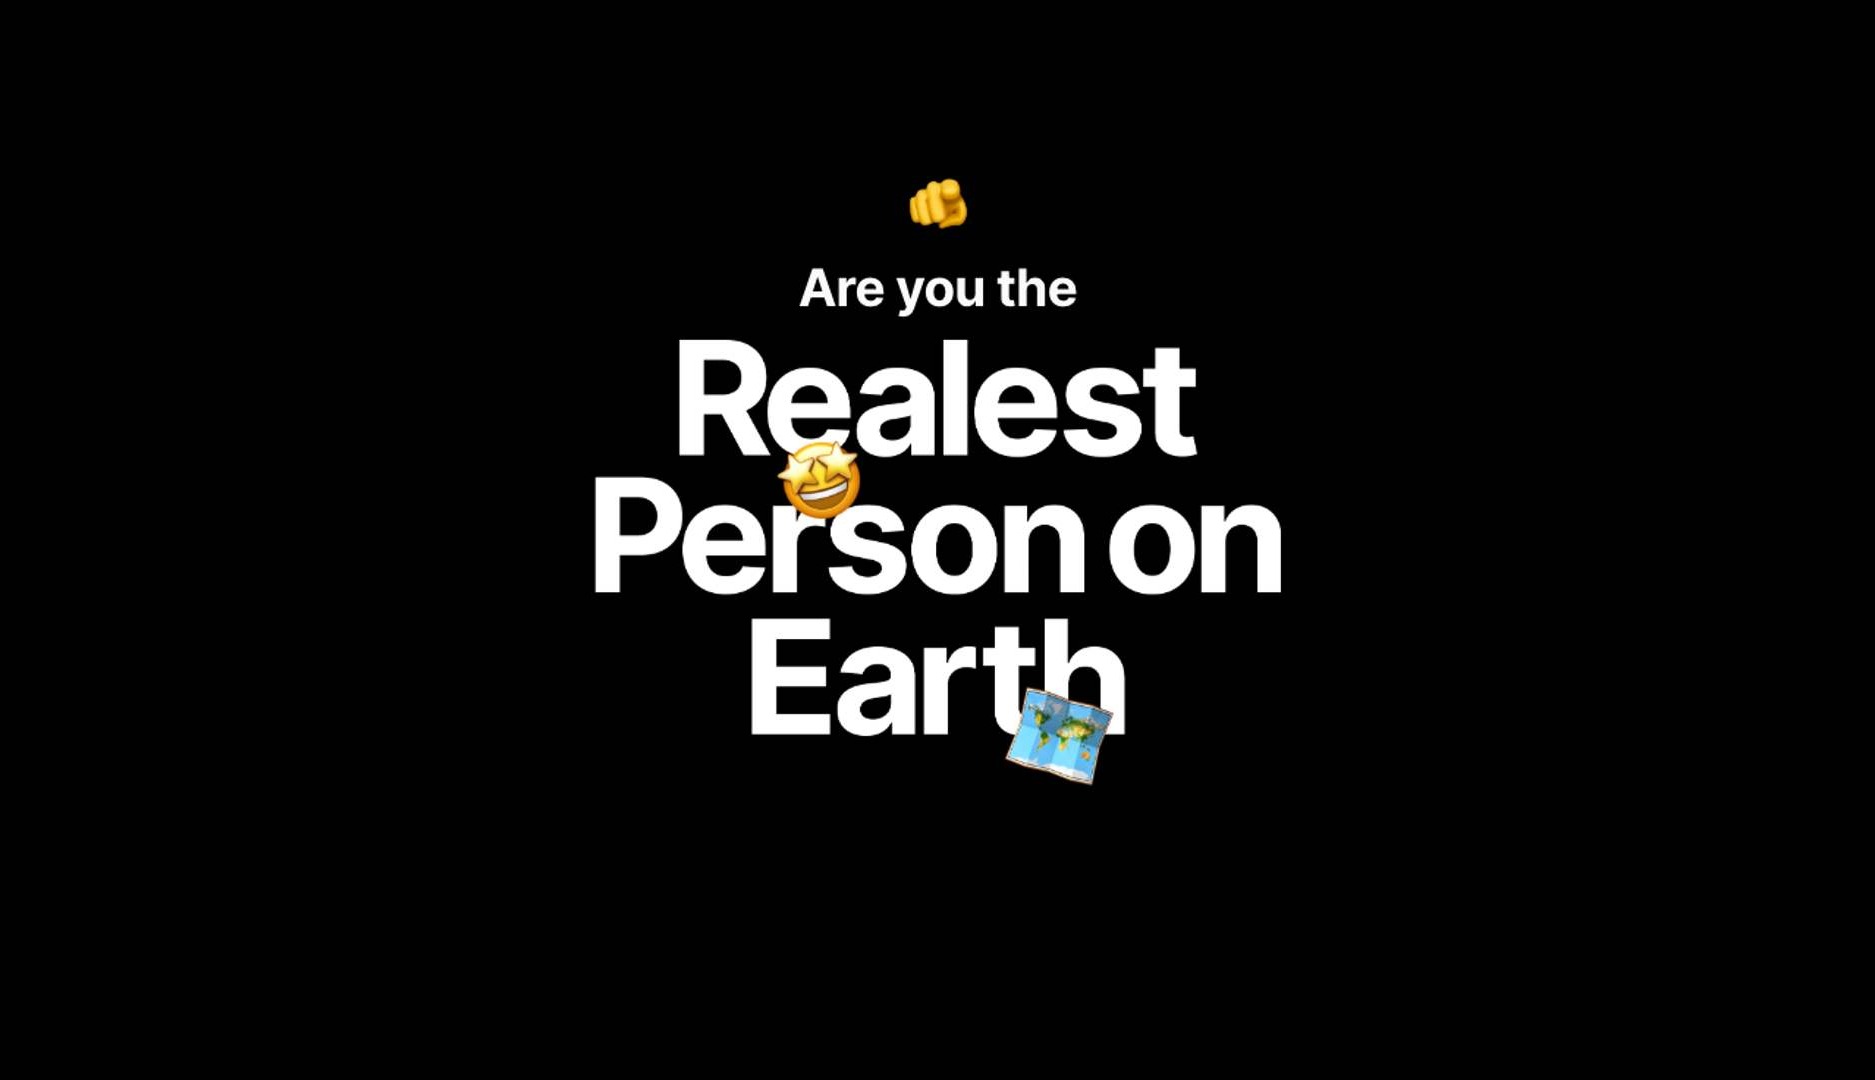 Reales Person on Earth